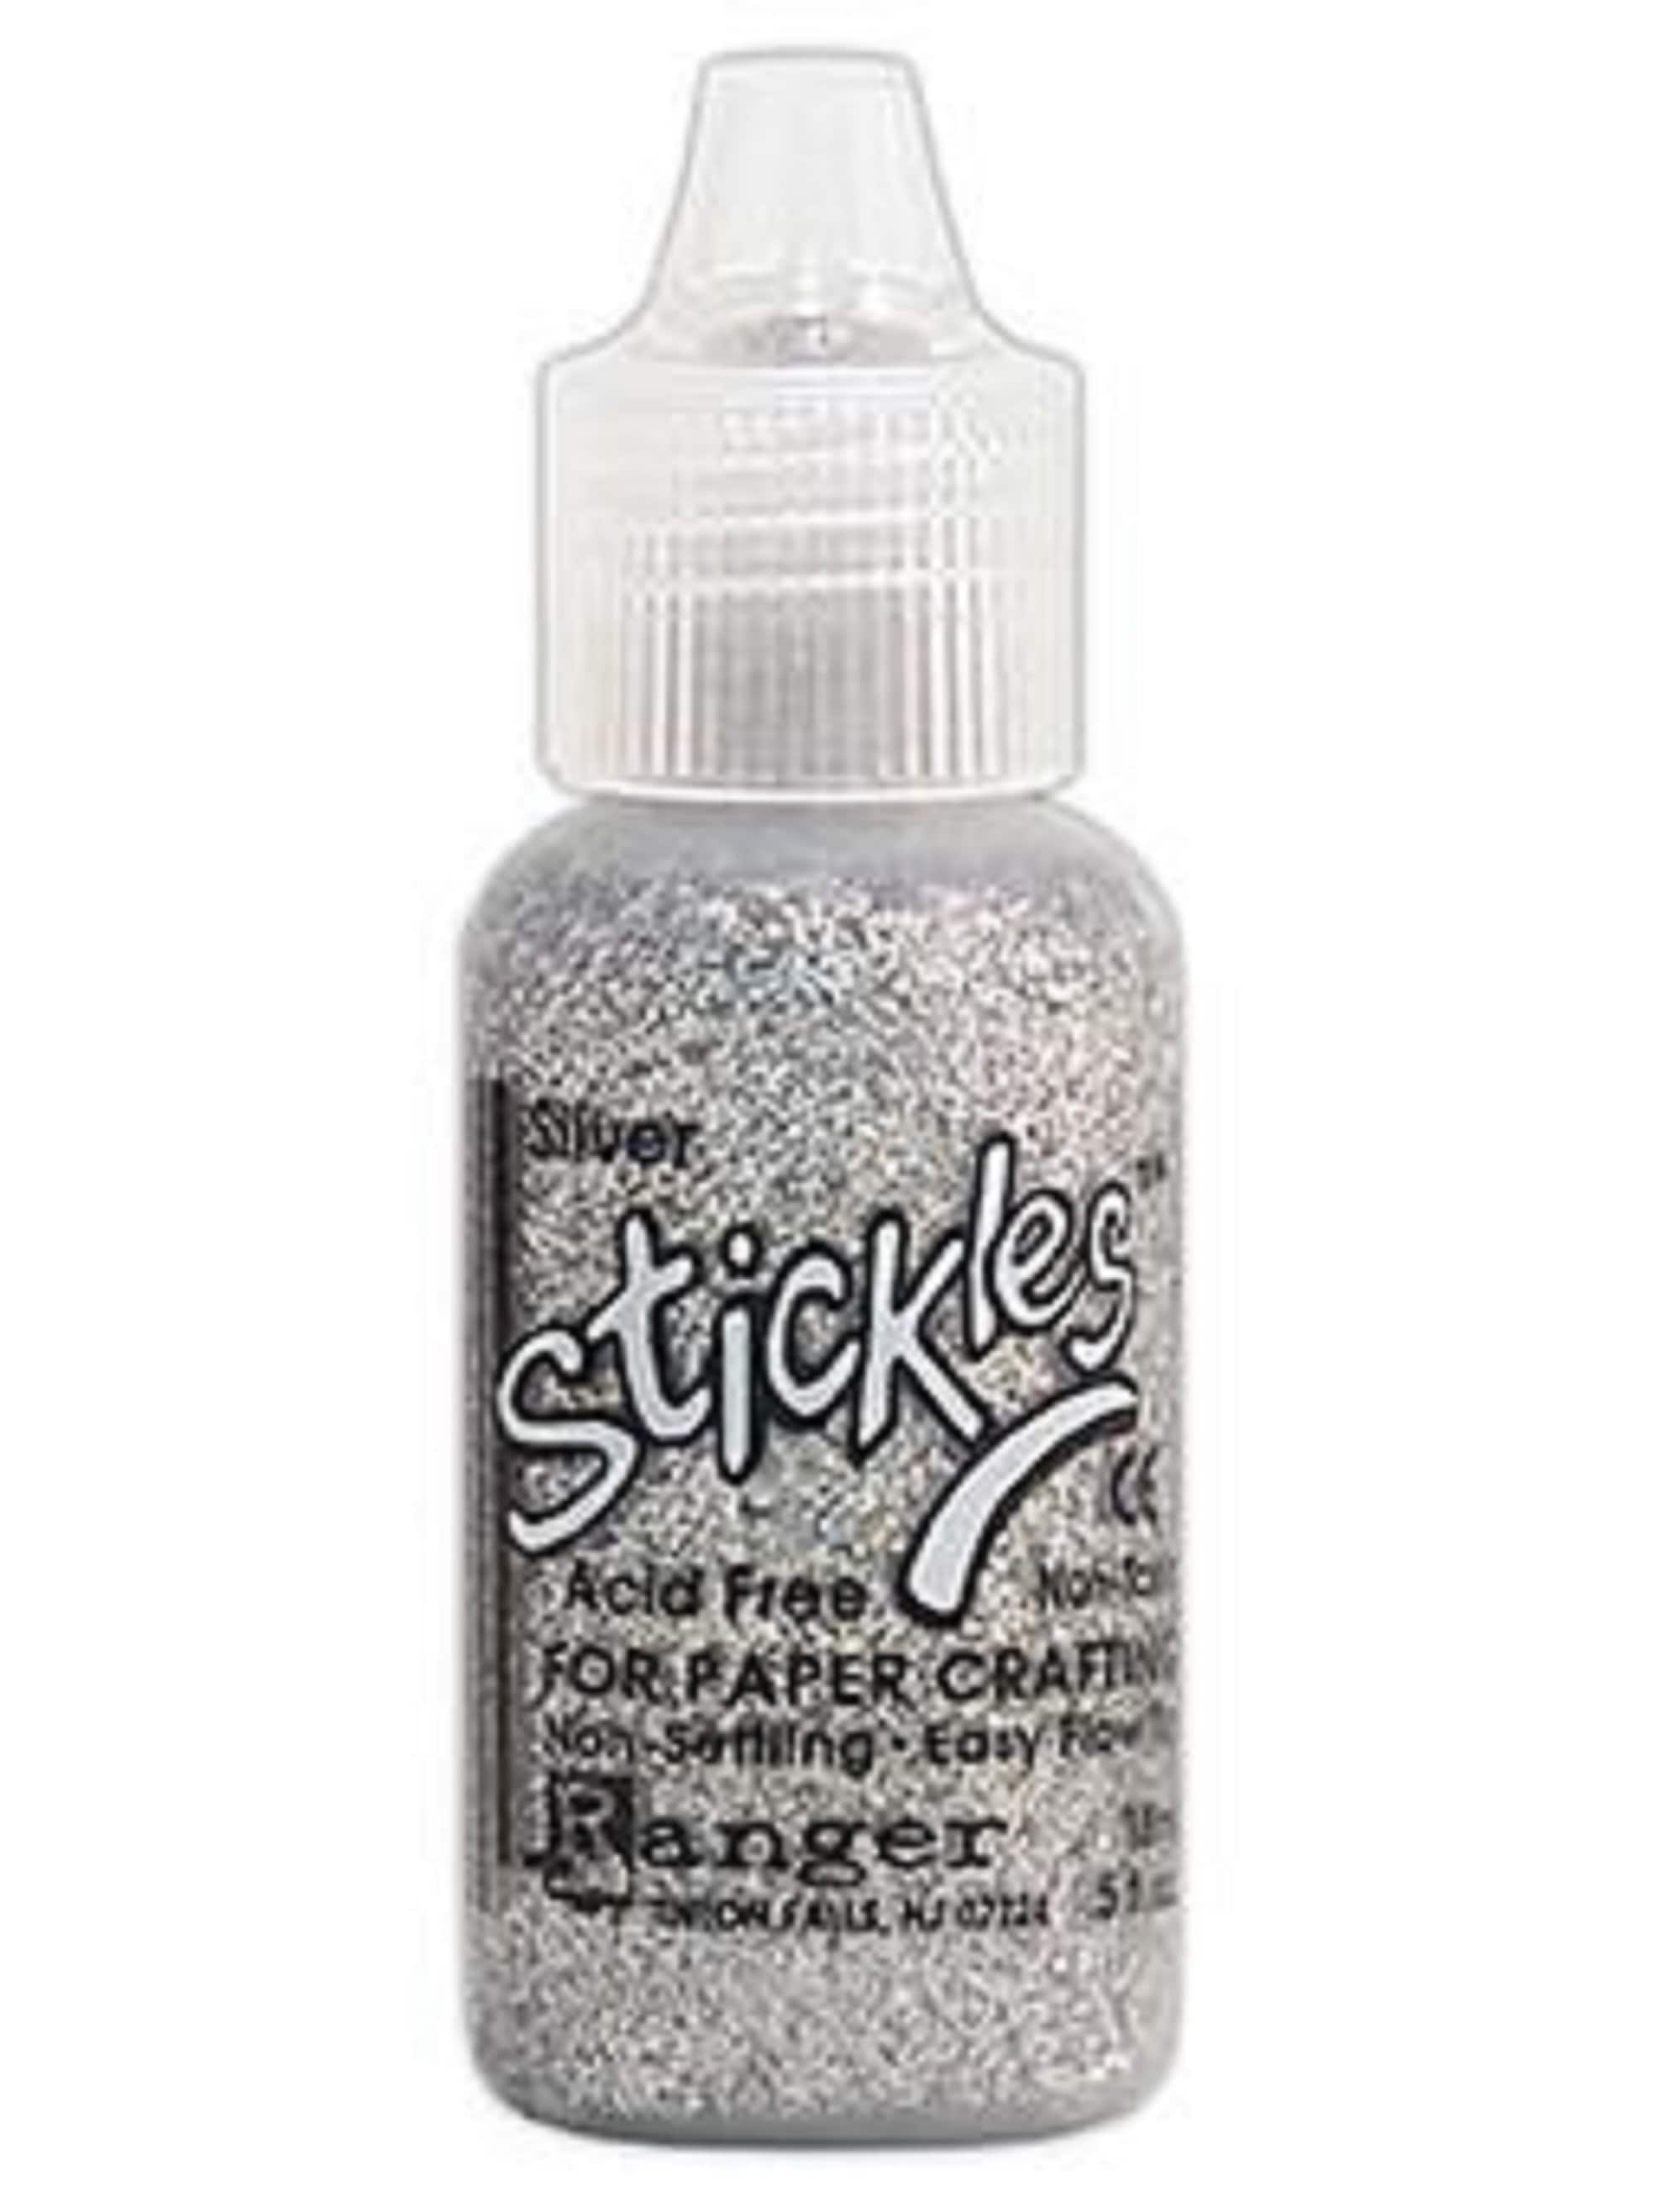 OEM High quality sparkle stickles glitter glue for scrapbooking